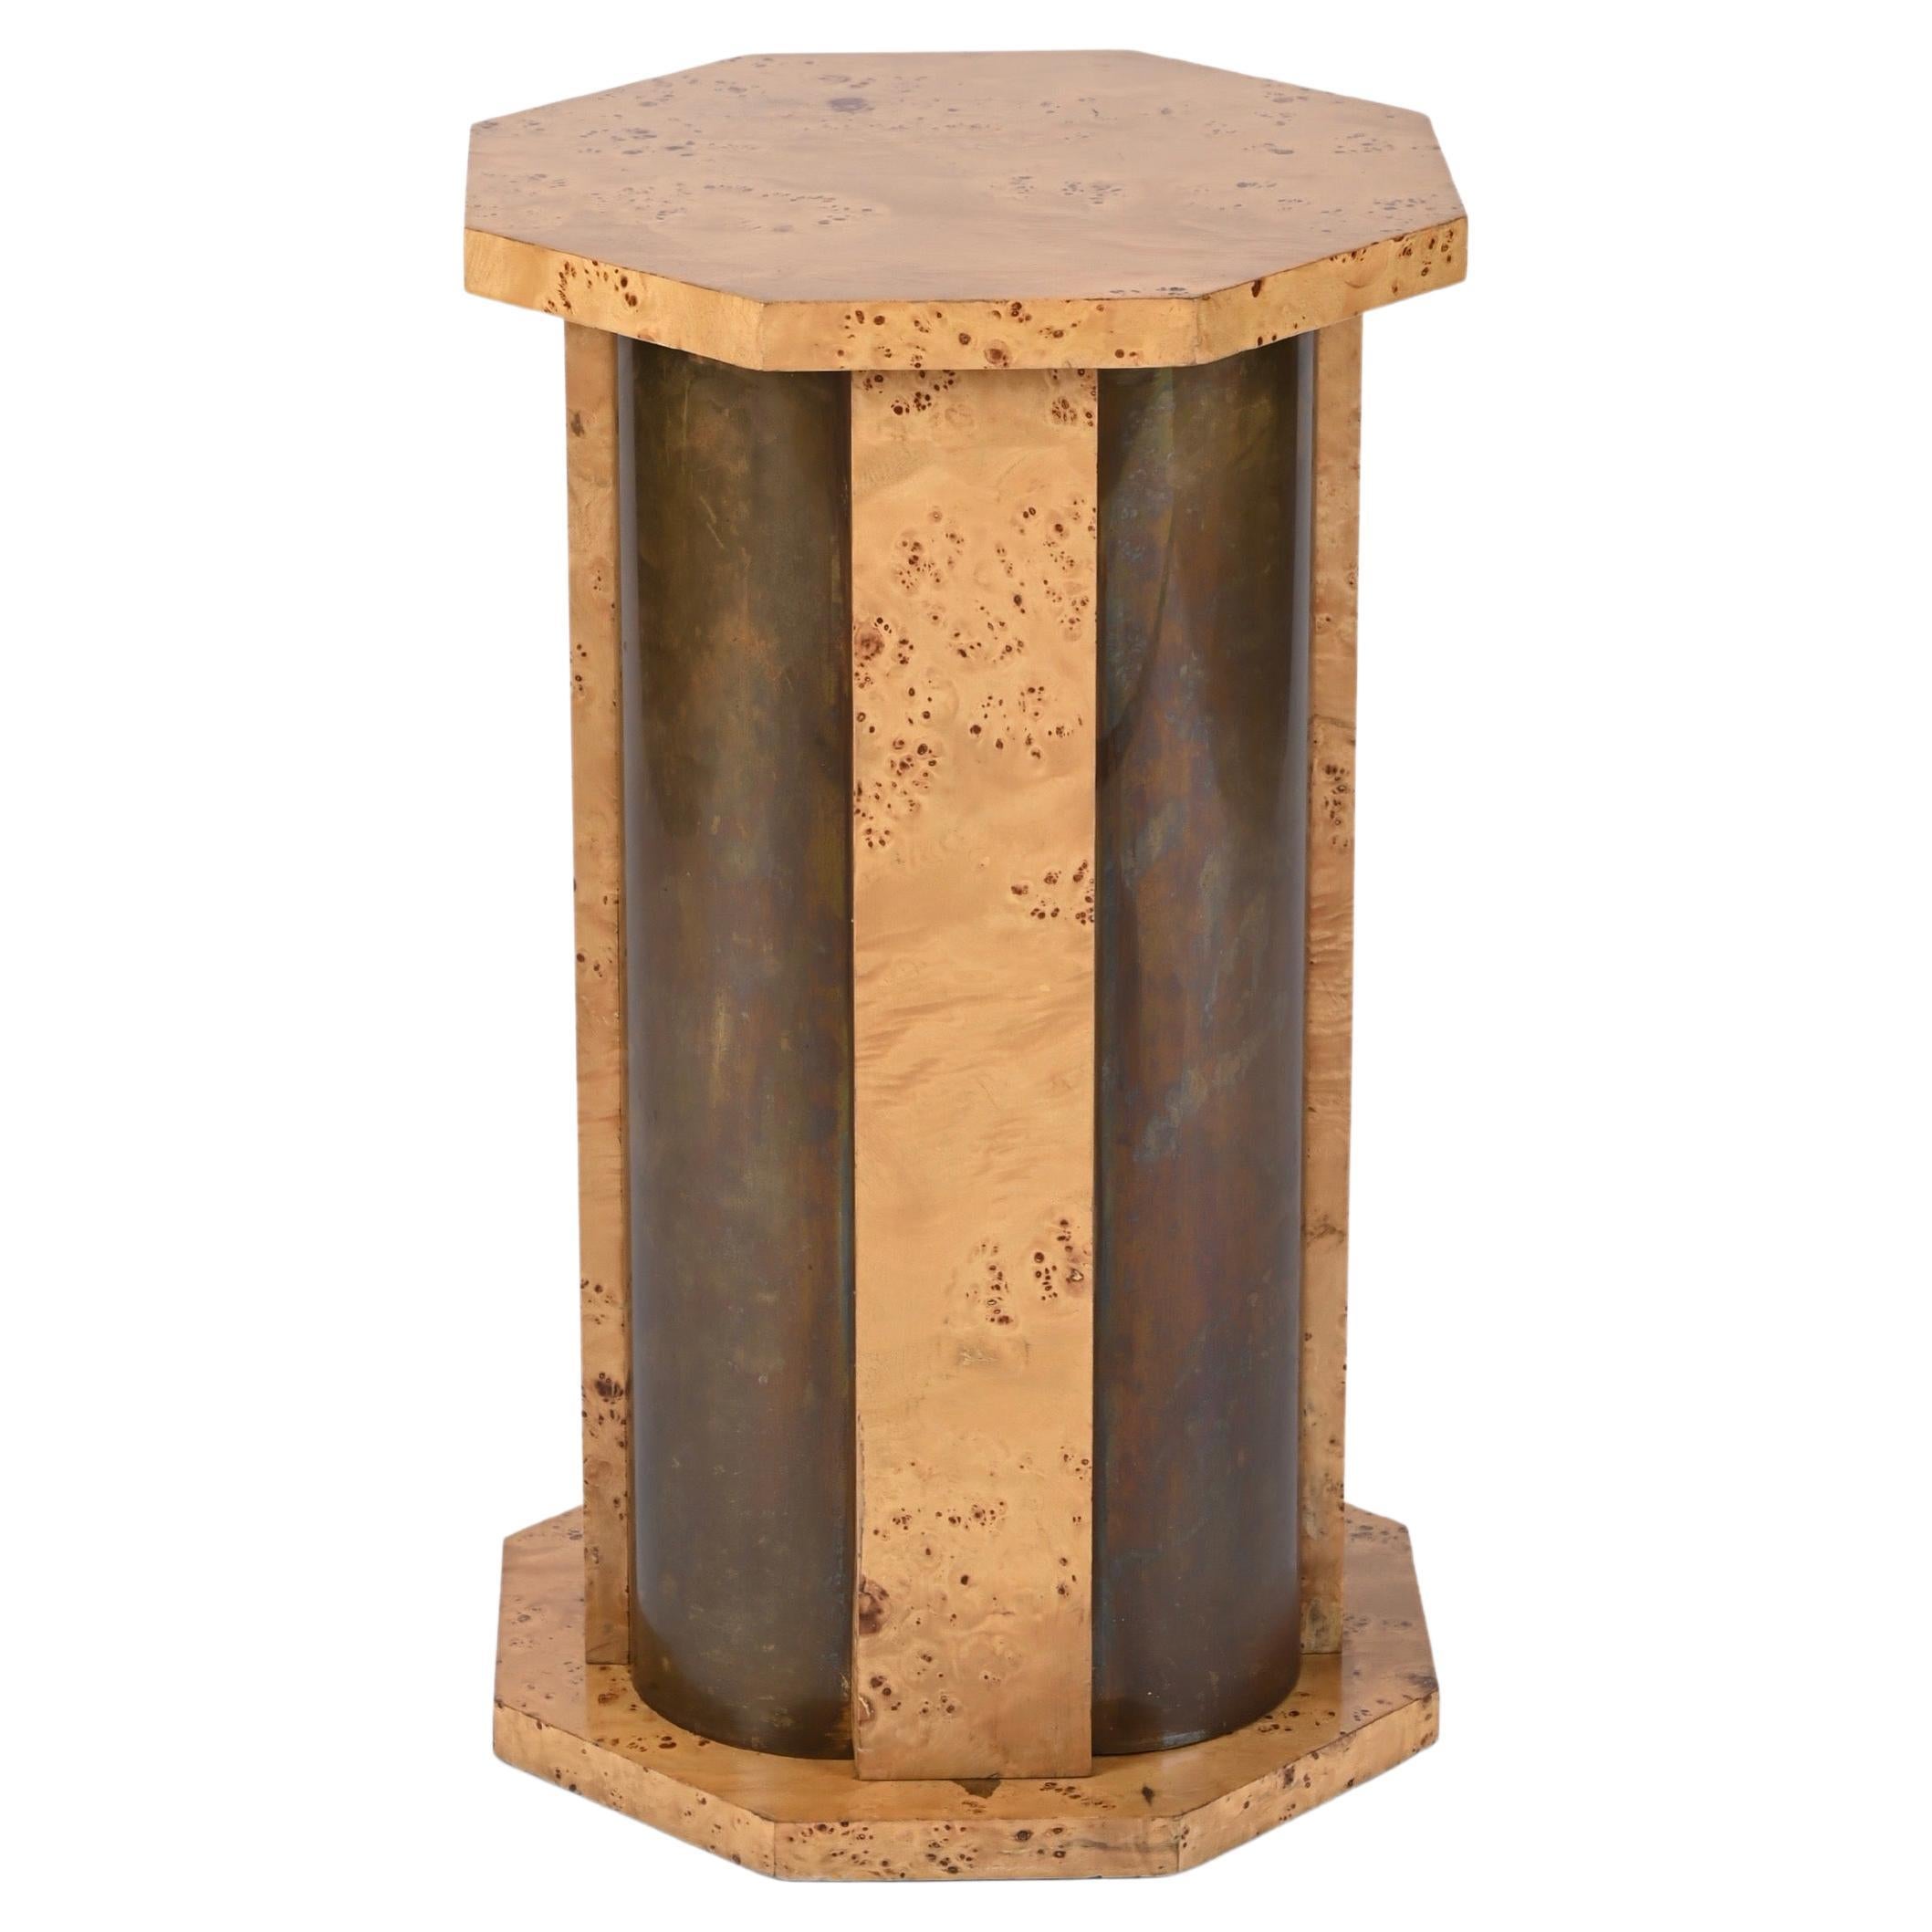 Tommaso Barbi Octagonal Table Pedestal in Burl Wood and Brass, Italy, 1970